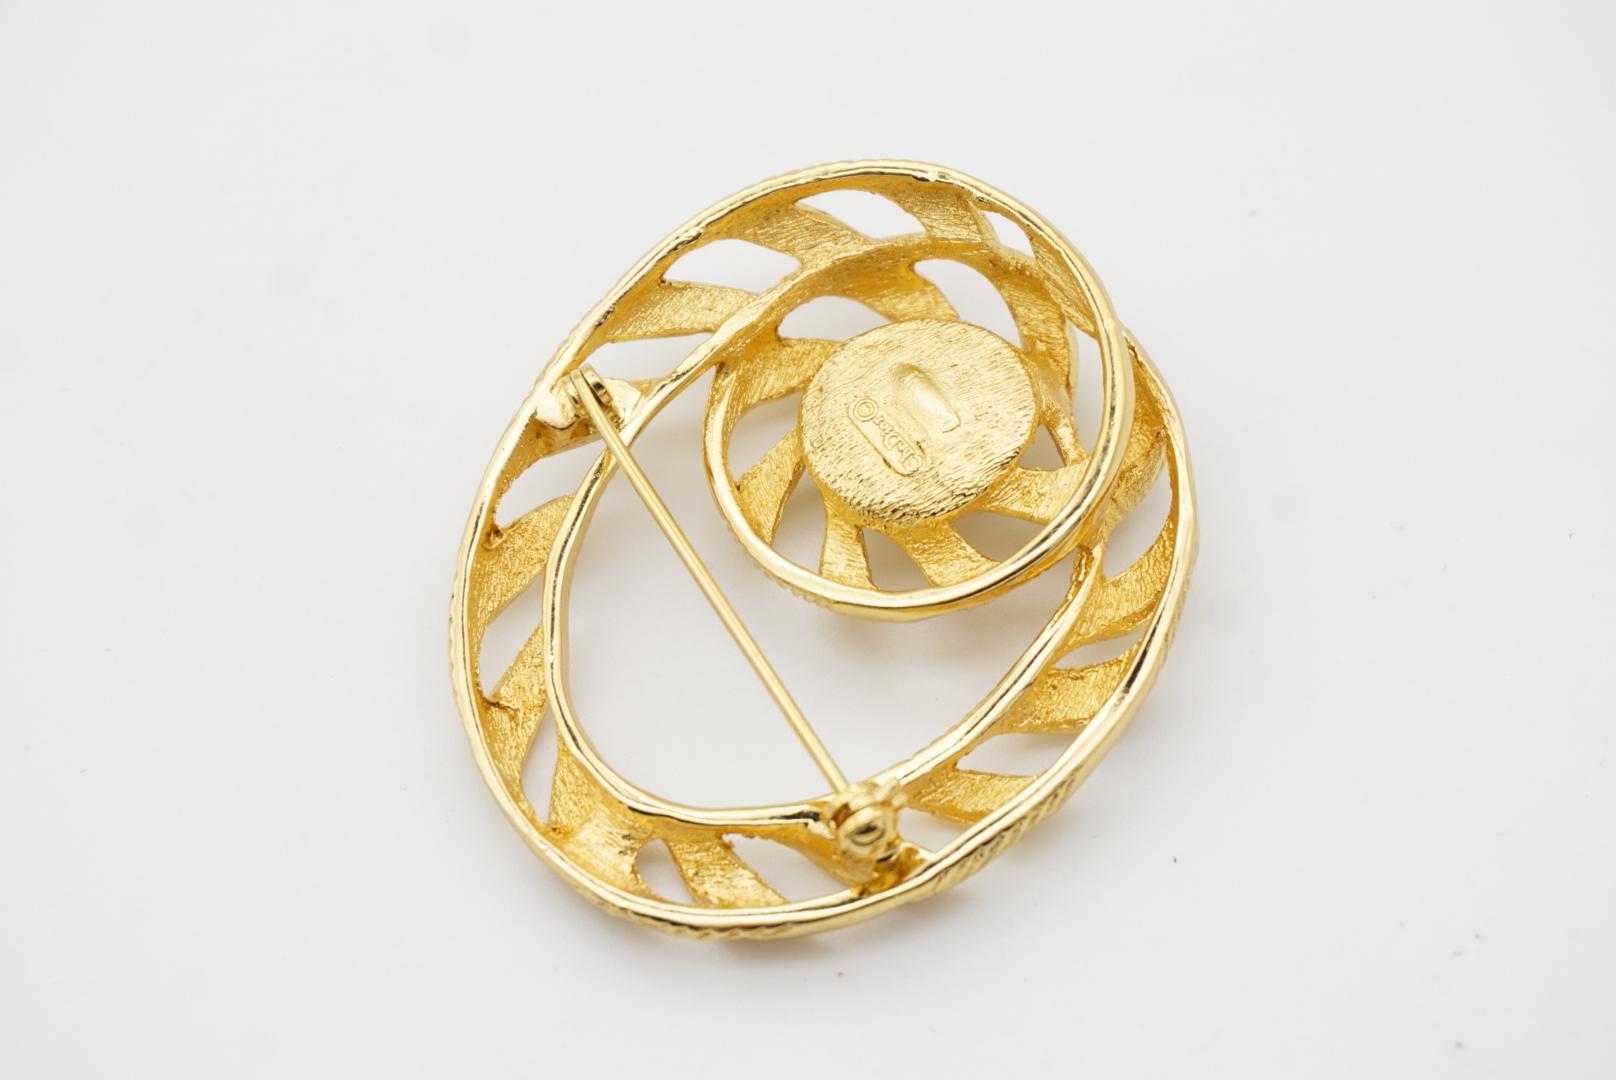 Christian Dior 1970s Vintage Large Oval Swirl Openwork Round Pearl Gold Brooch For Sale 5